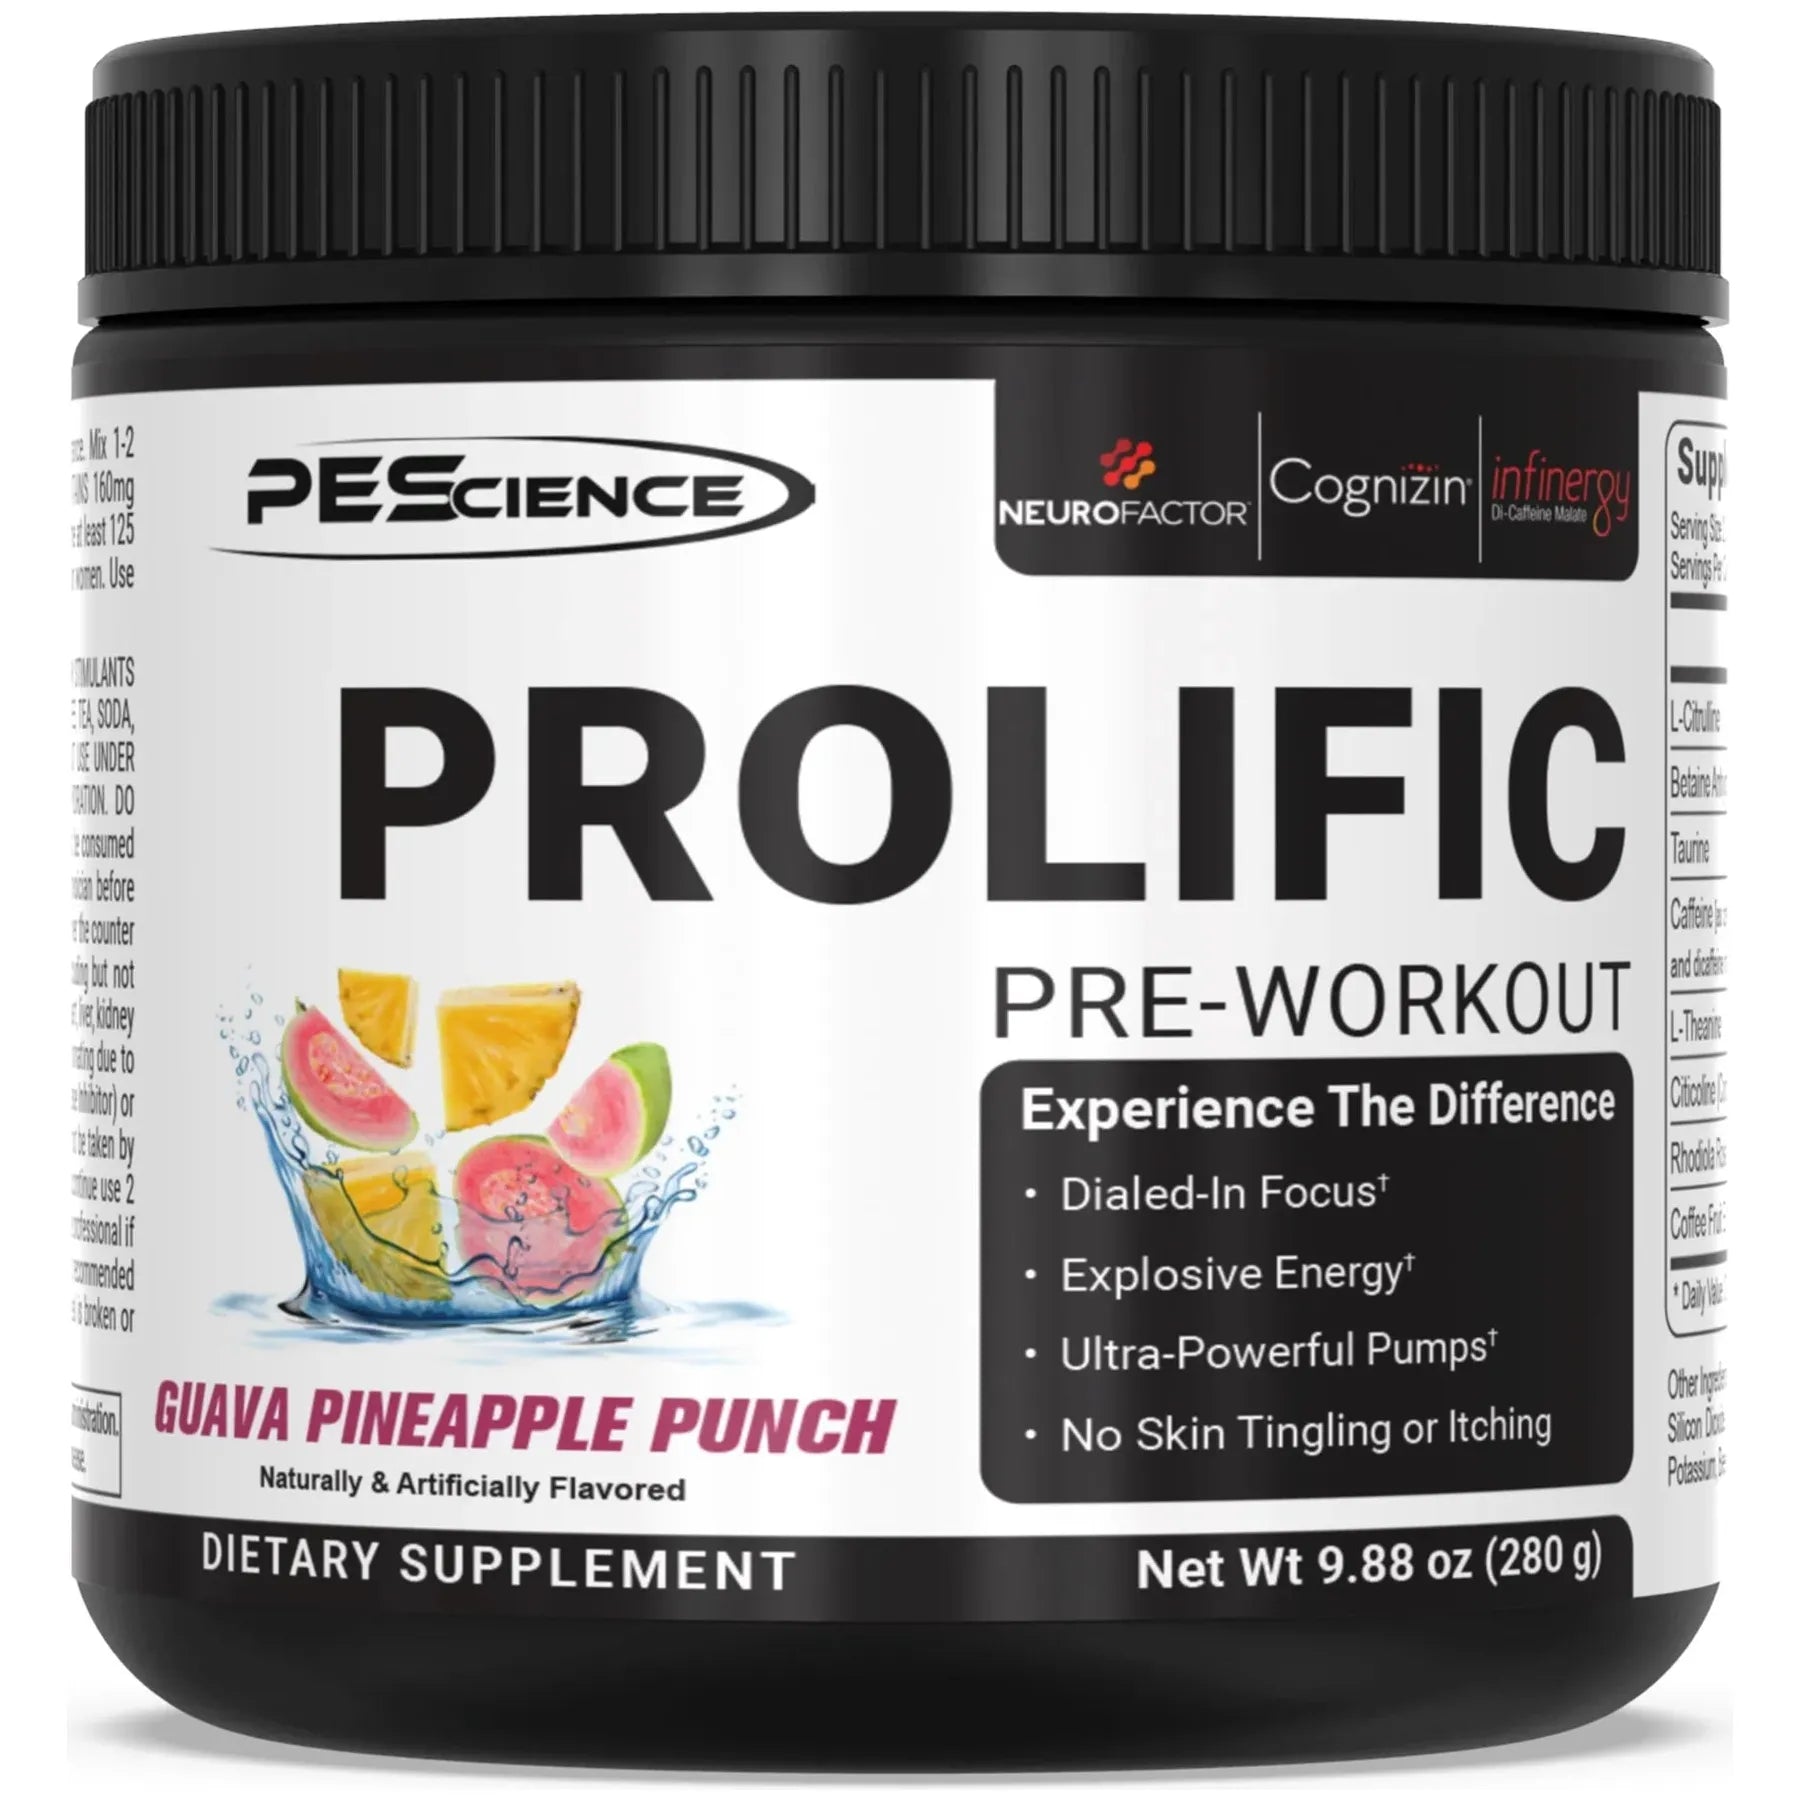 PEScience Prolific Pre-Workout (40 servings) Pre-workout Guava Pineapple Punch PEScience comming-soon-pescience-prolific-pre-workout-40-servings